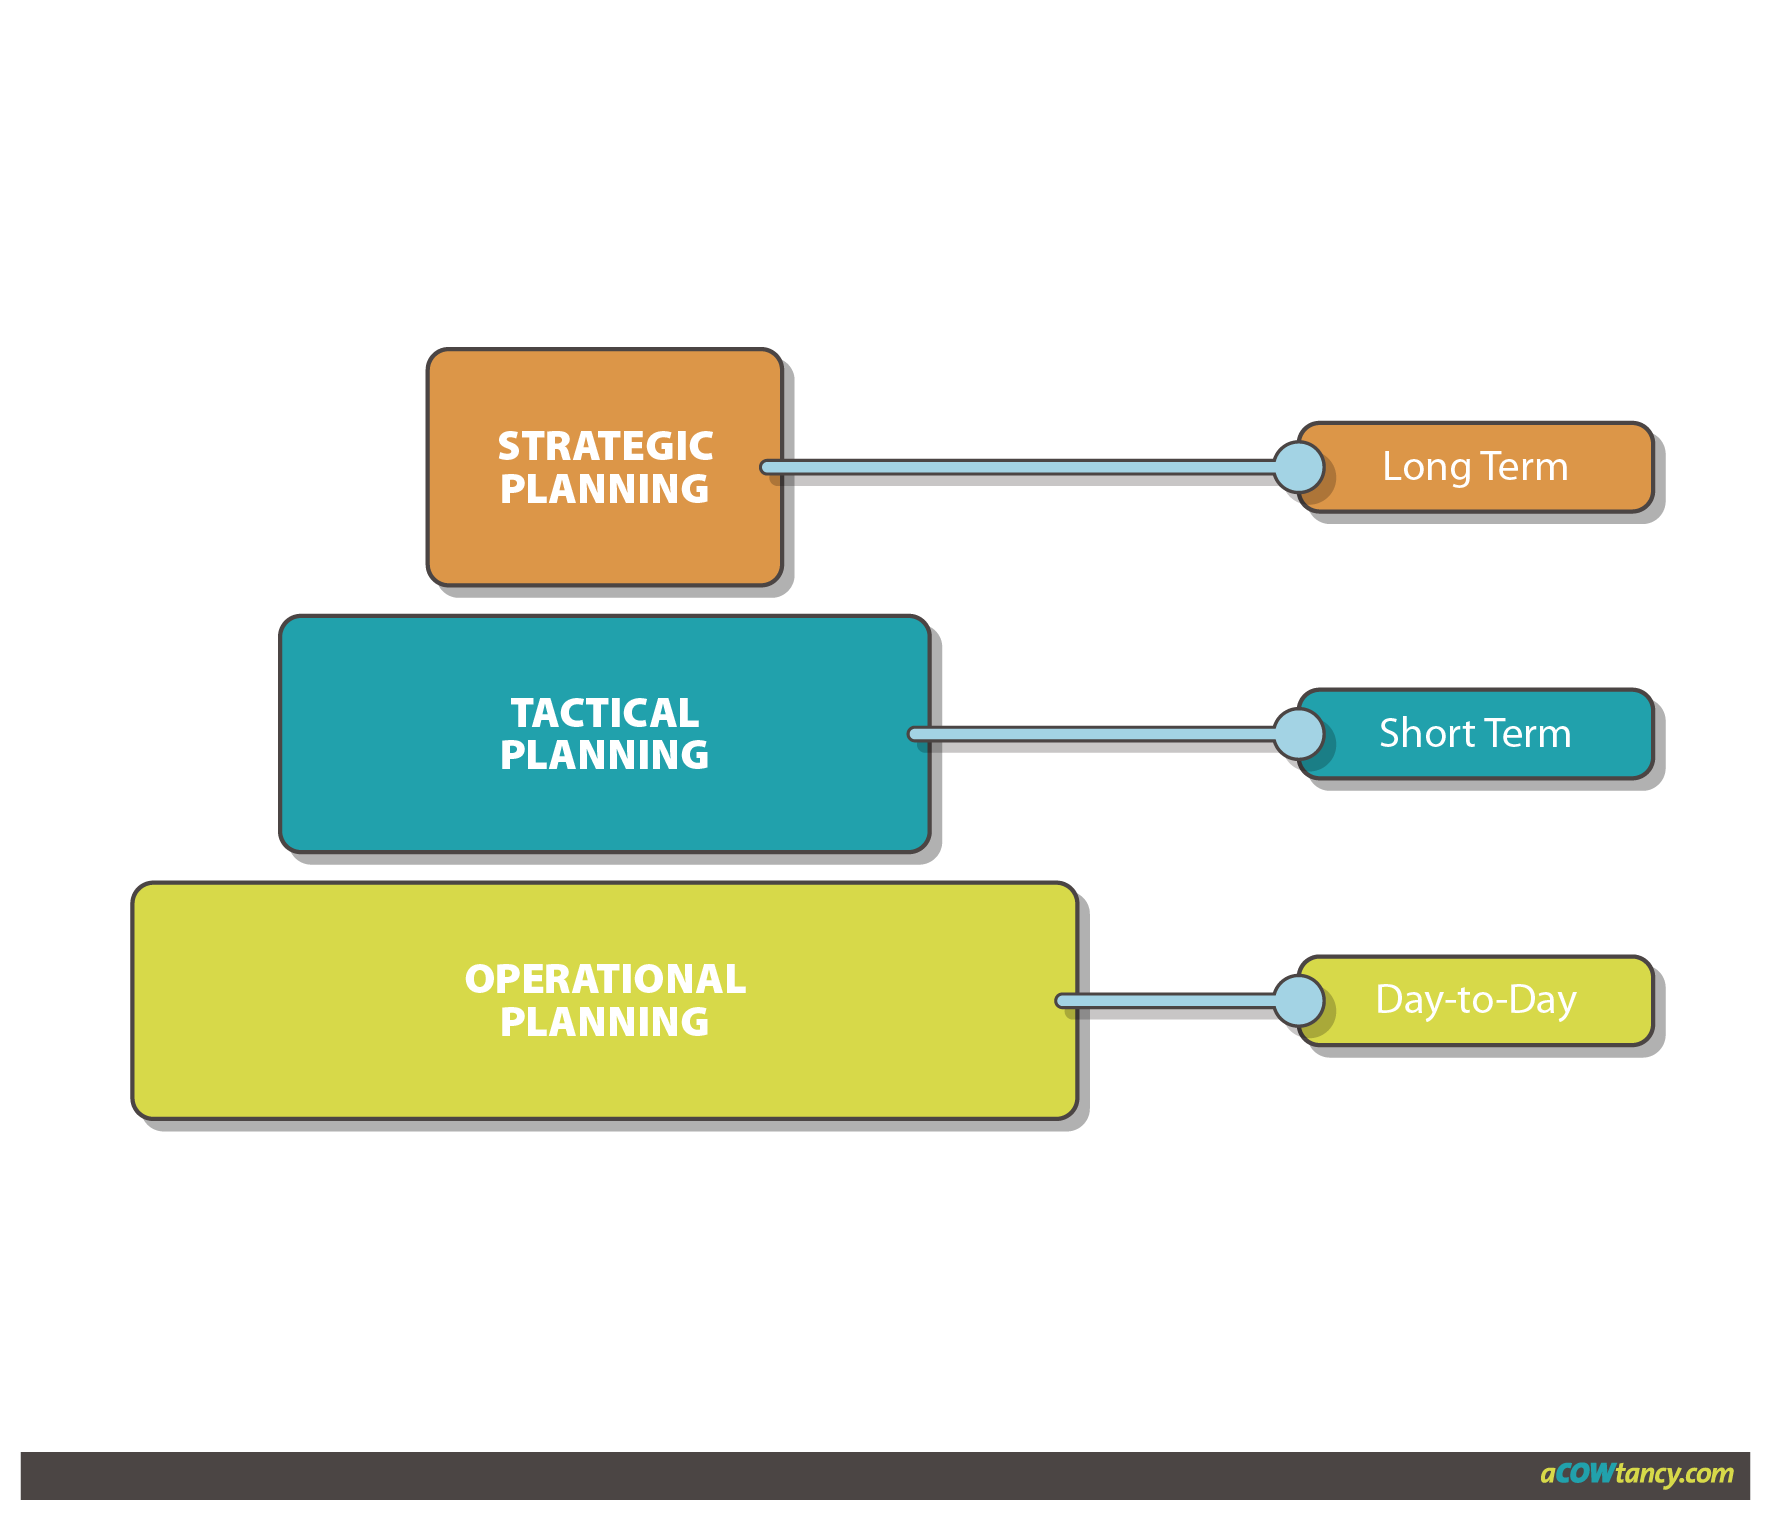 ACCA MA F2 A1d study material operational planning graph